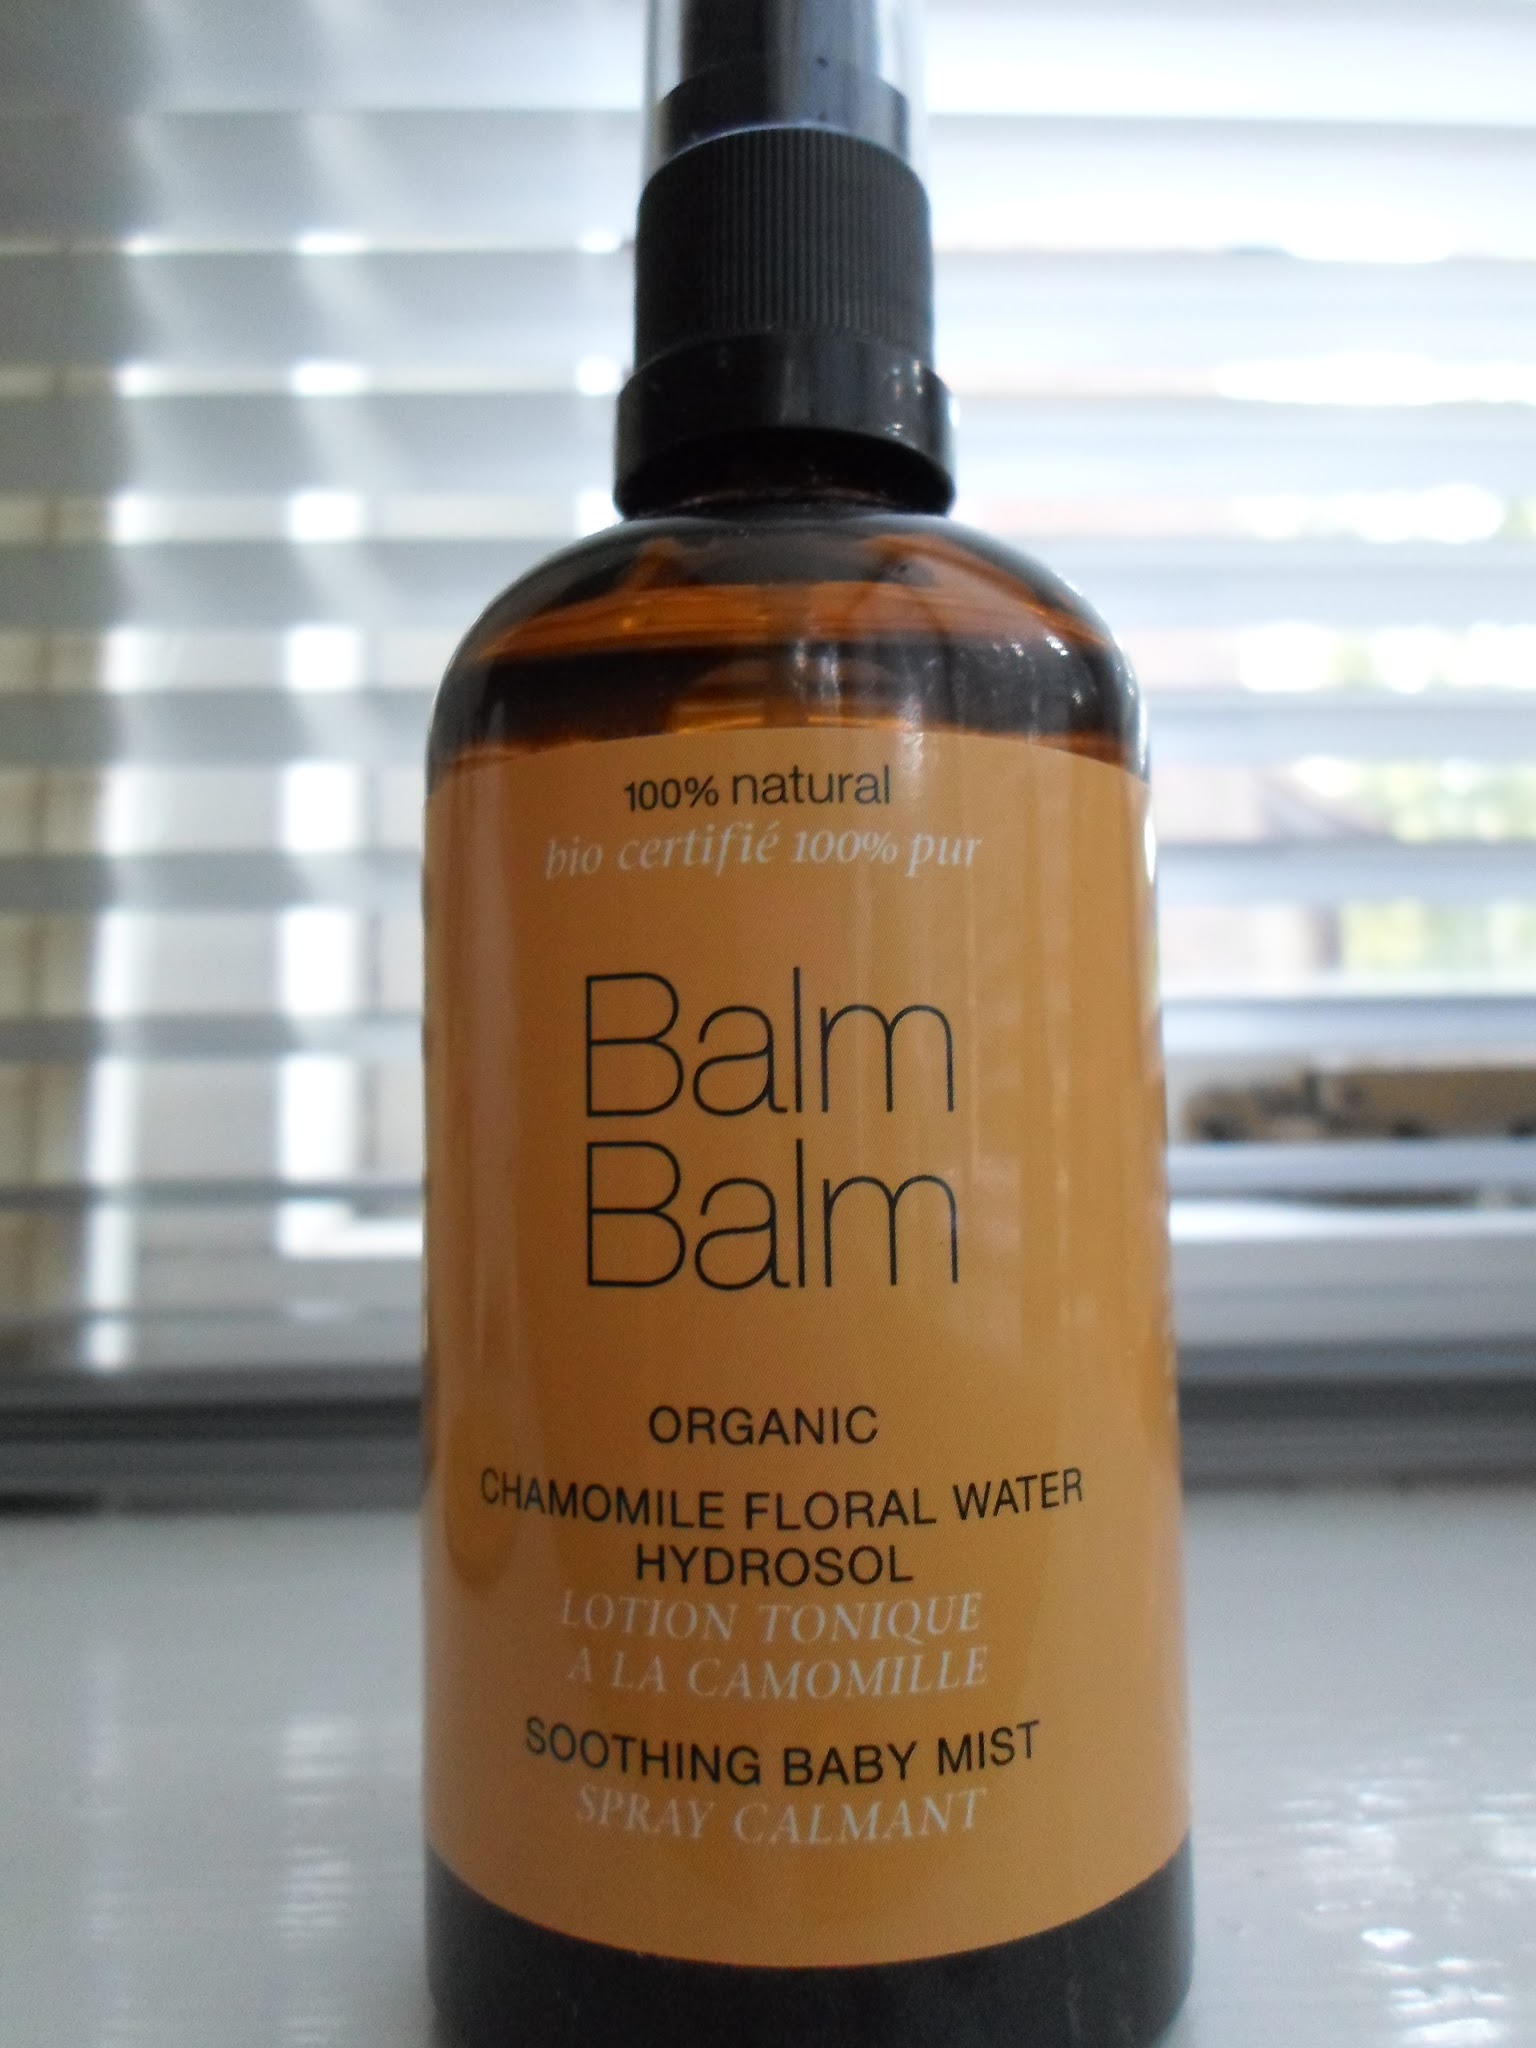 Balm Balm Organic Chamomile Floral Water - Soothing Baby Mist